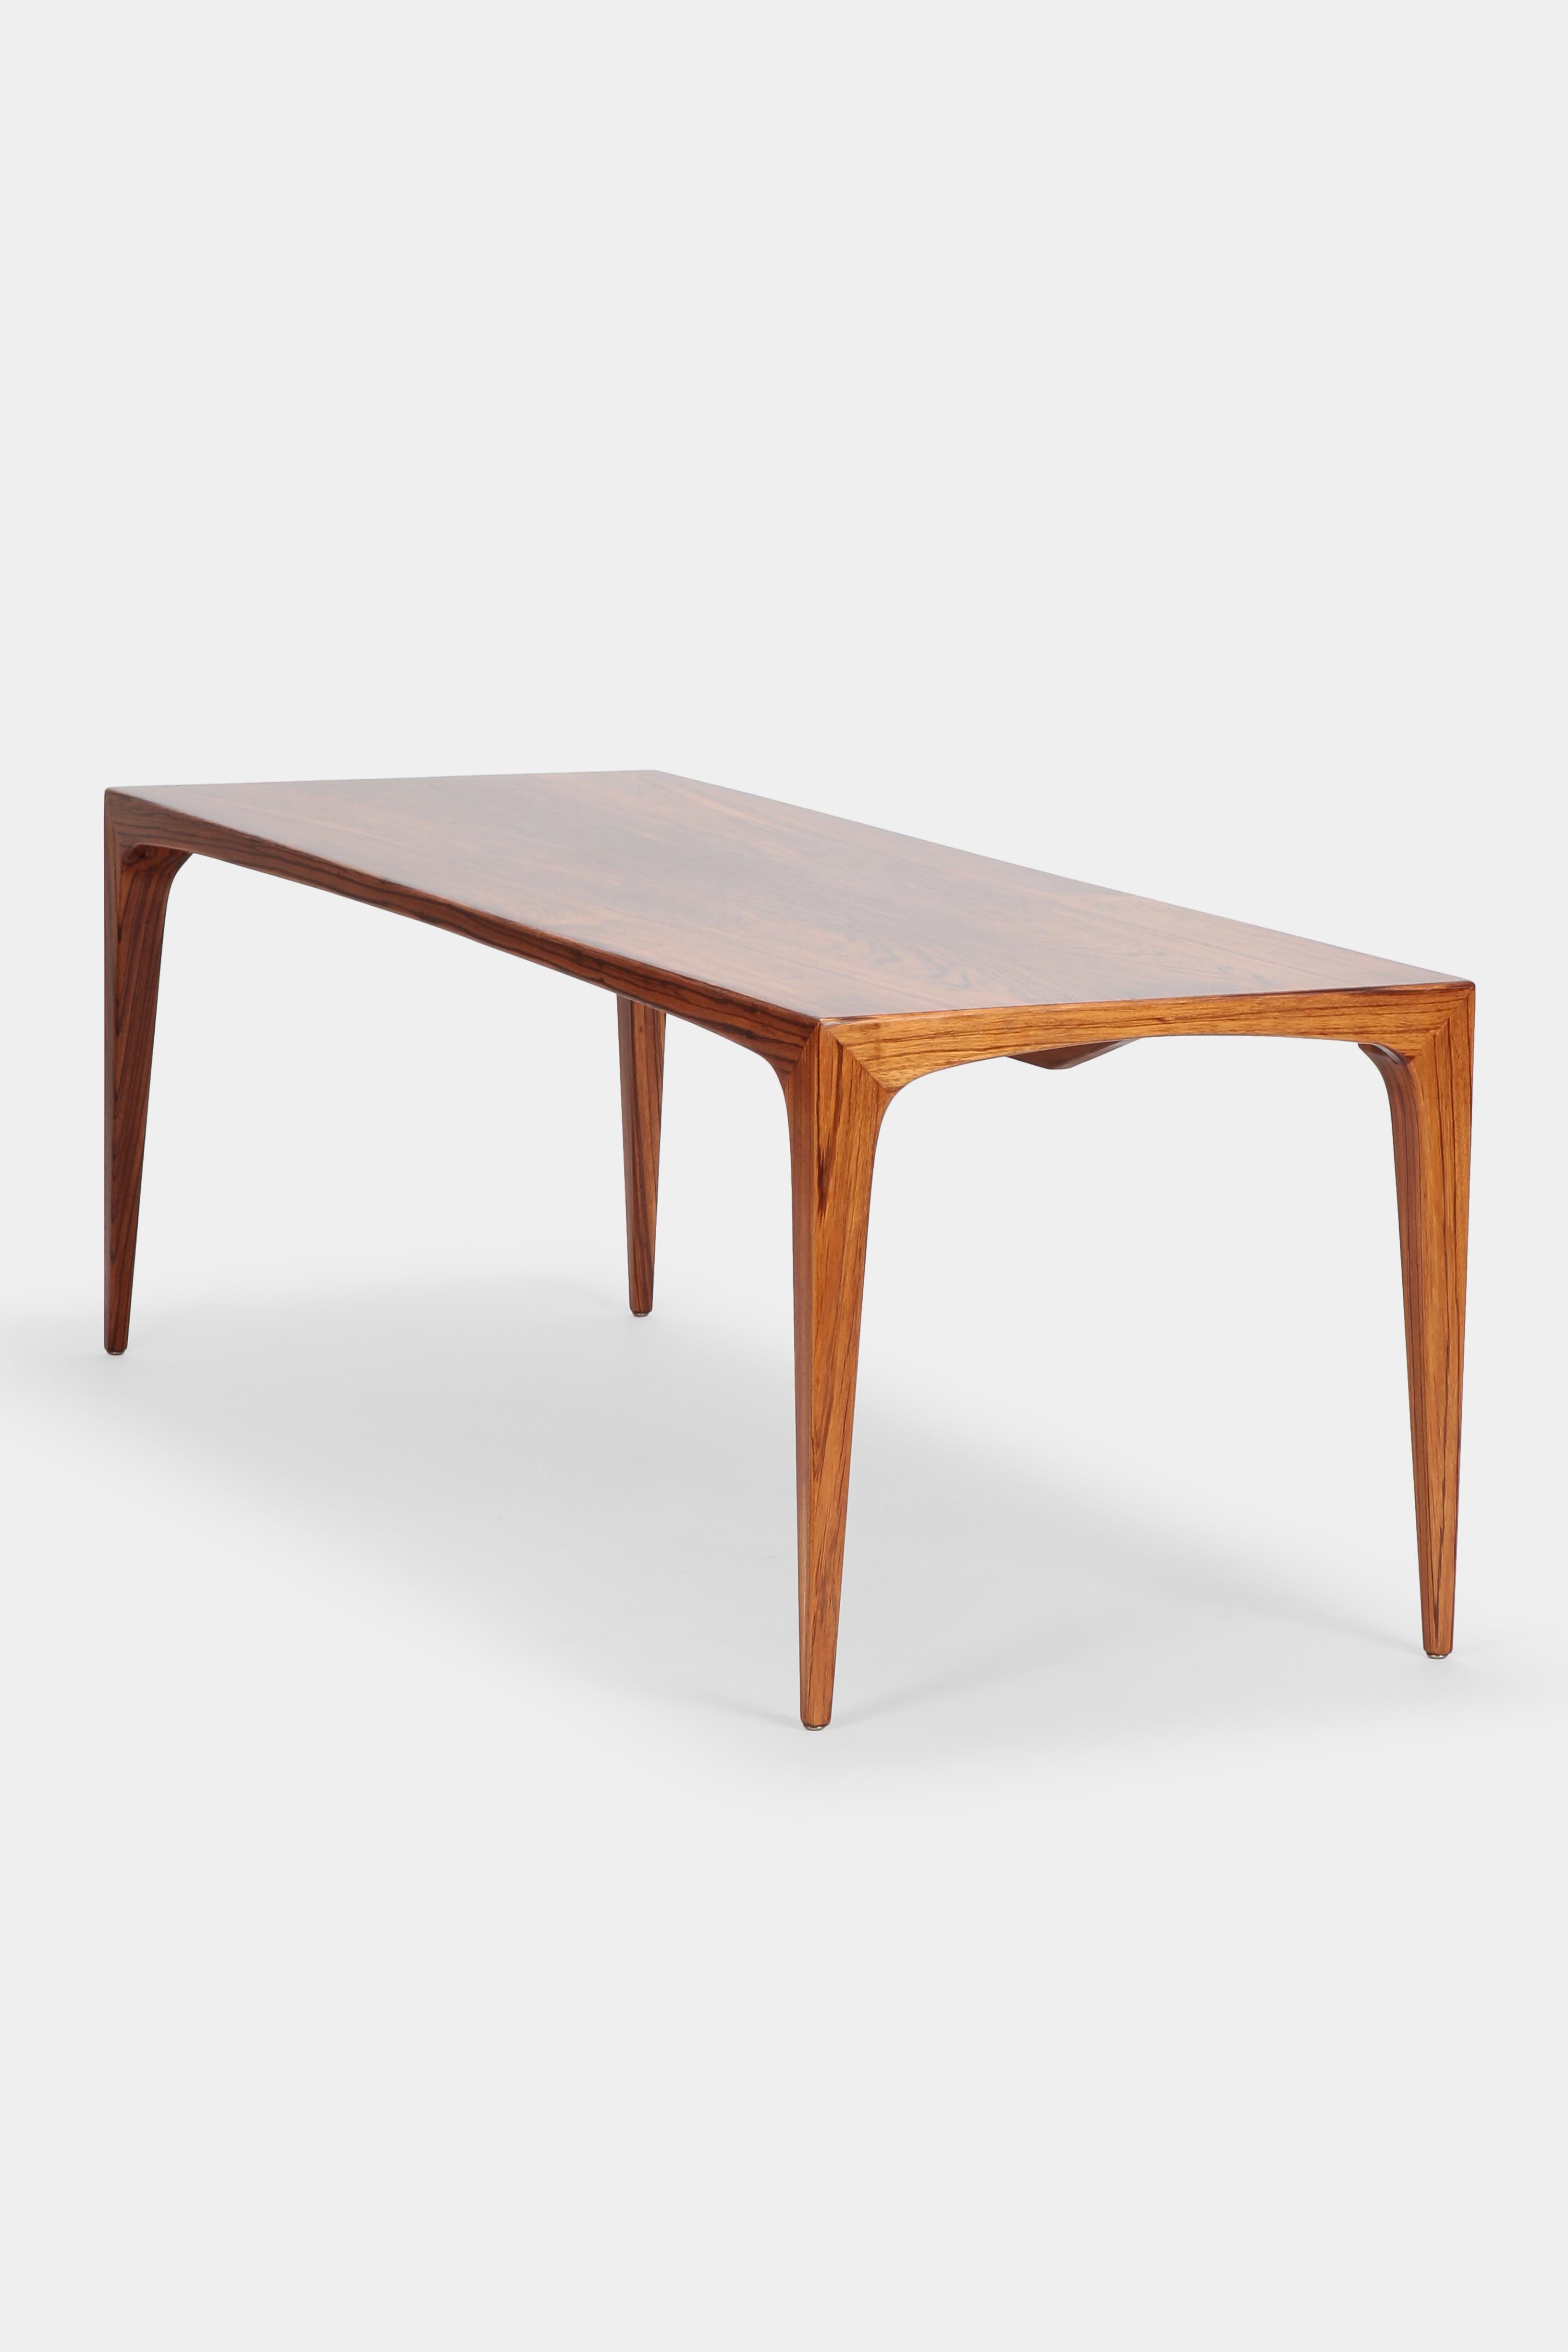 Description:
Erling Torvits coffee table manufactured by Heltborg Møbler in the 1960s in Denmark. Very rare coffee table made of beautiful, newly lacquered Rio rosewood.